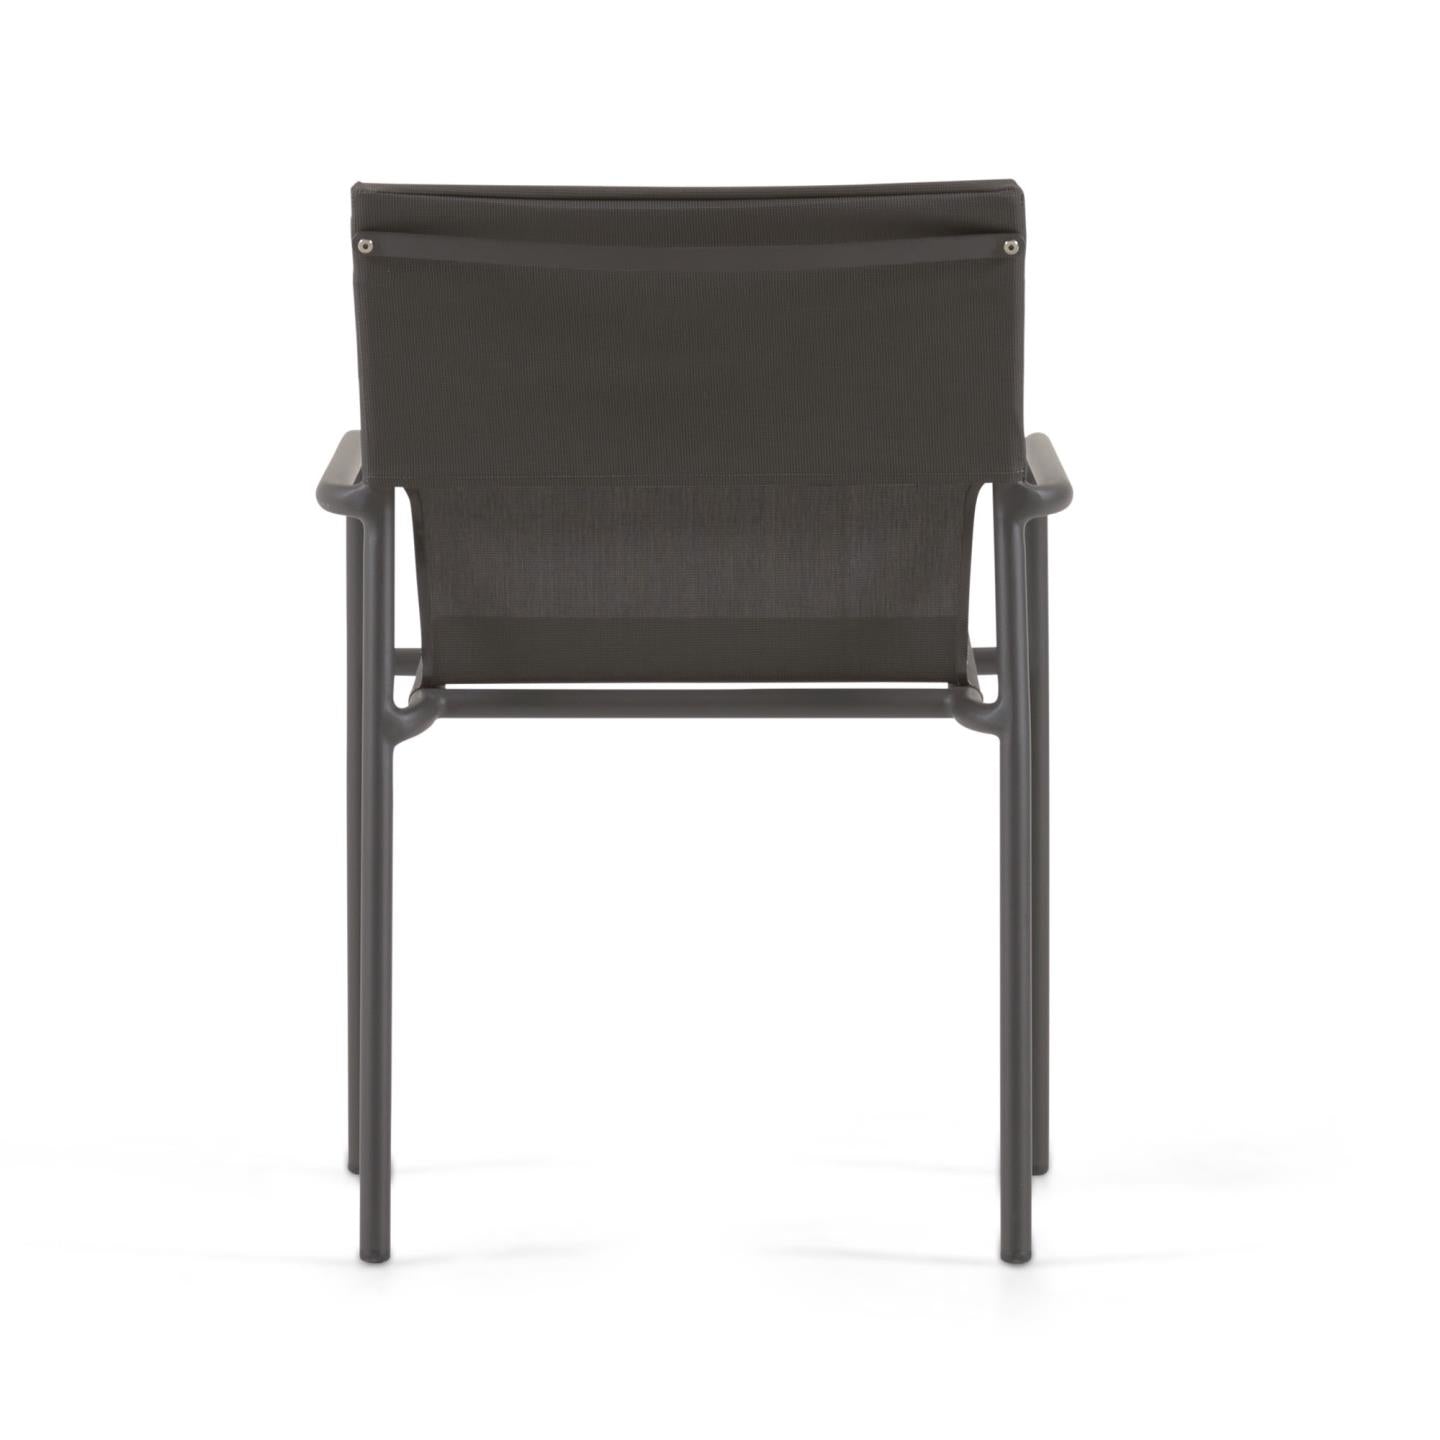 Zaltana stackable outdoor chair in aluminium with a matt black painted finish